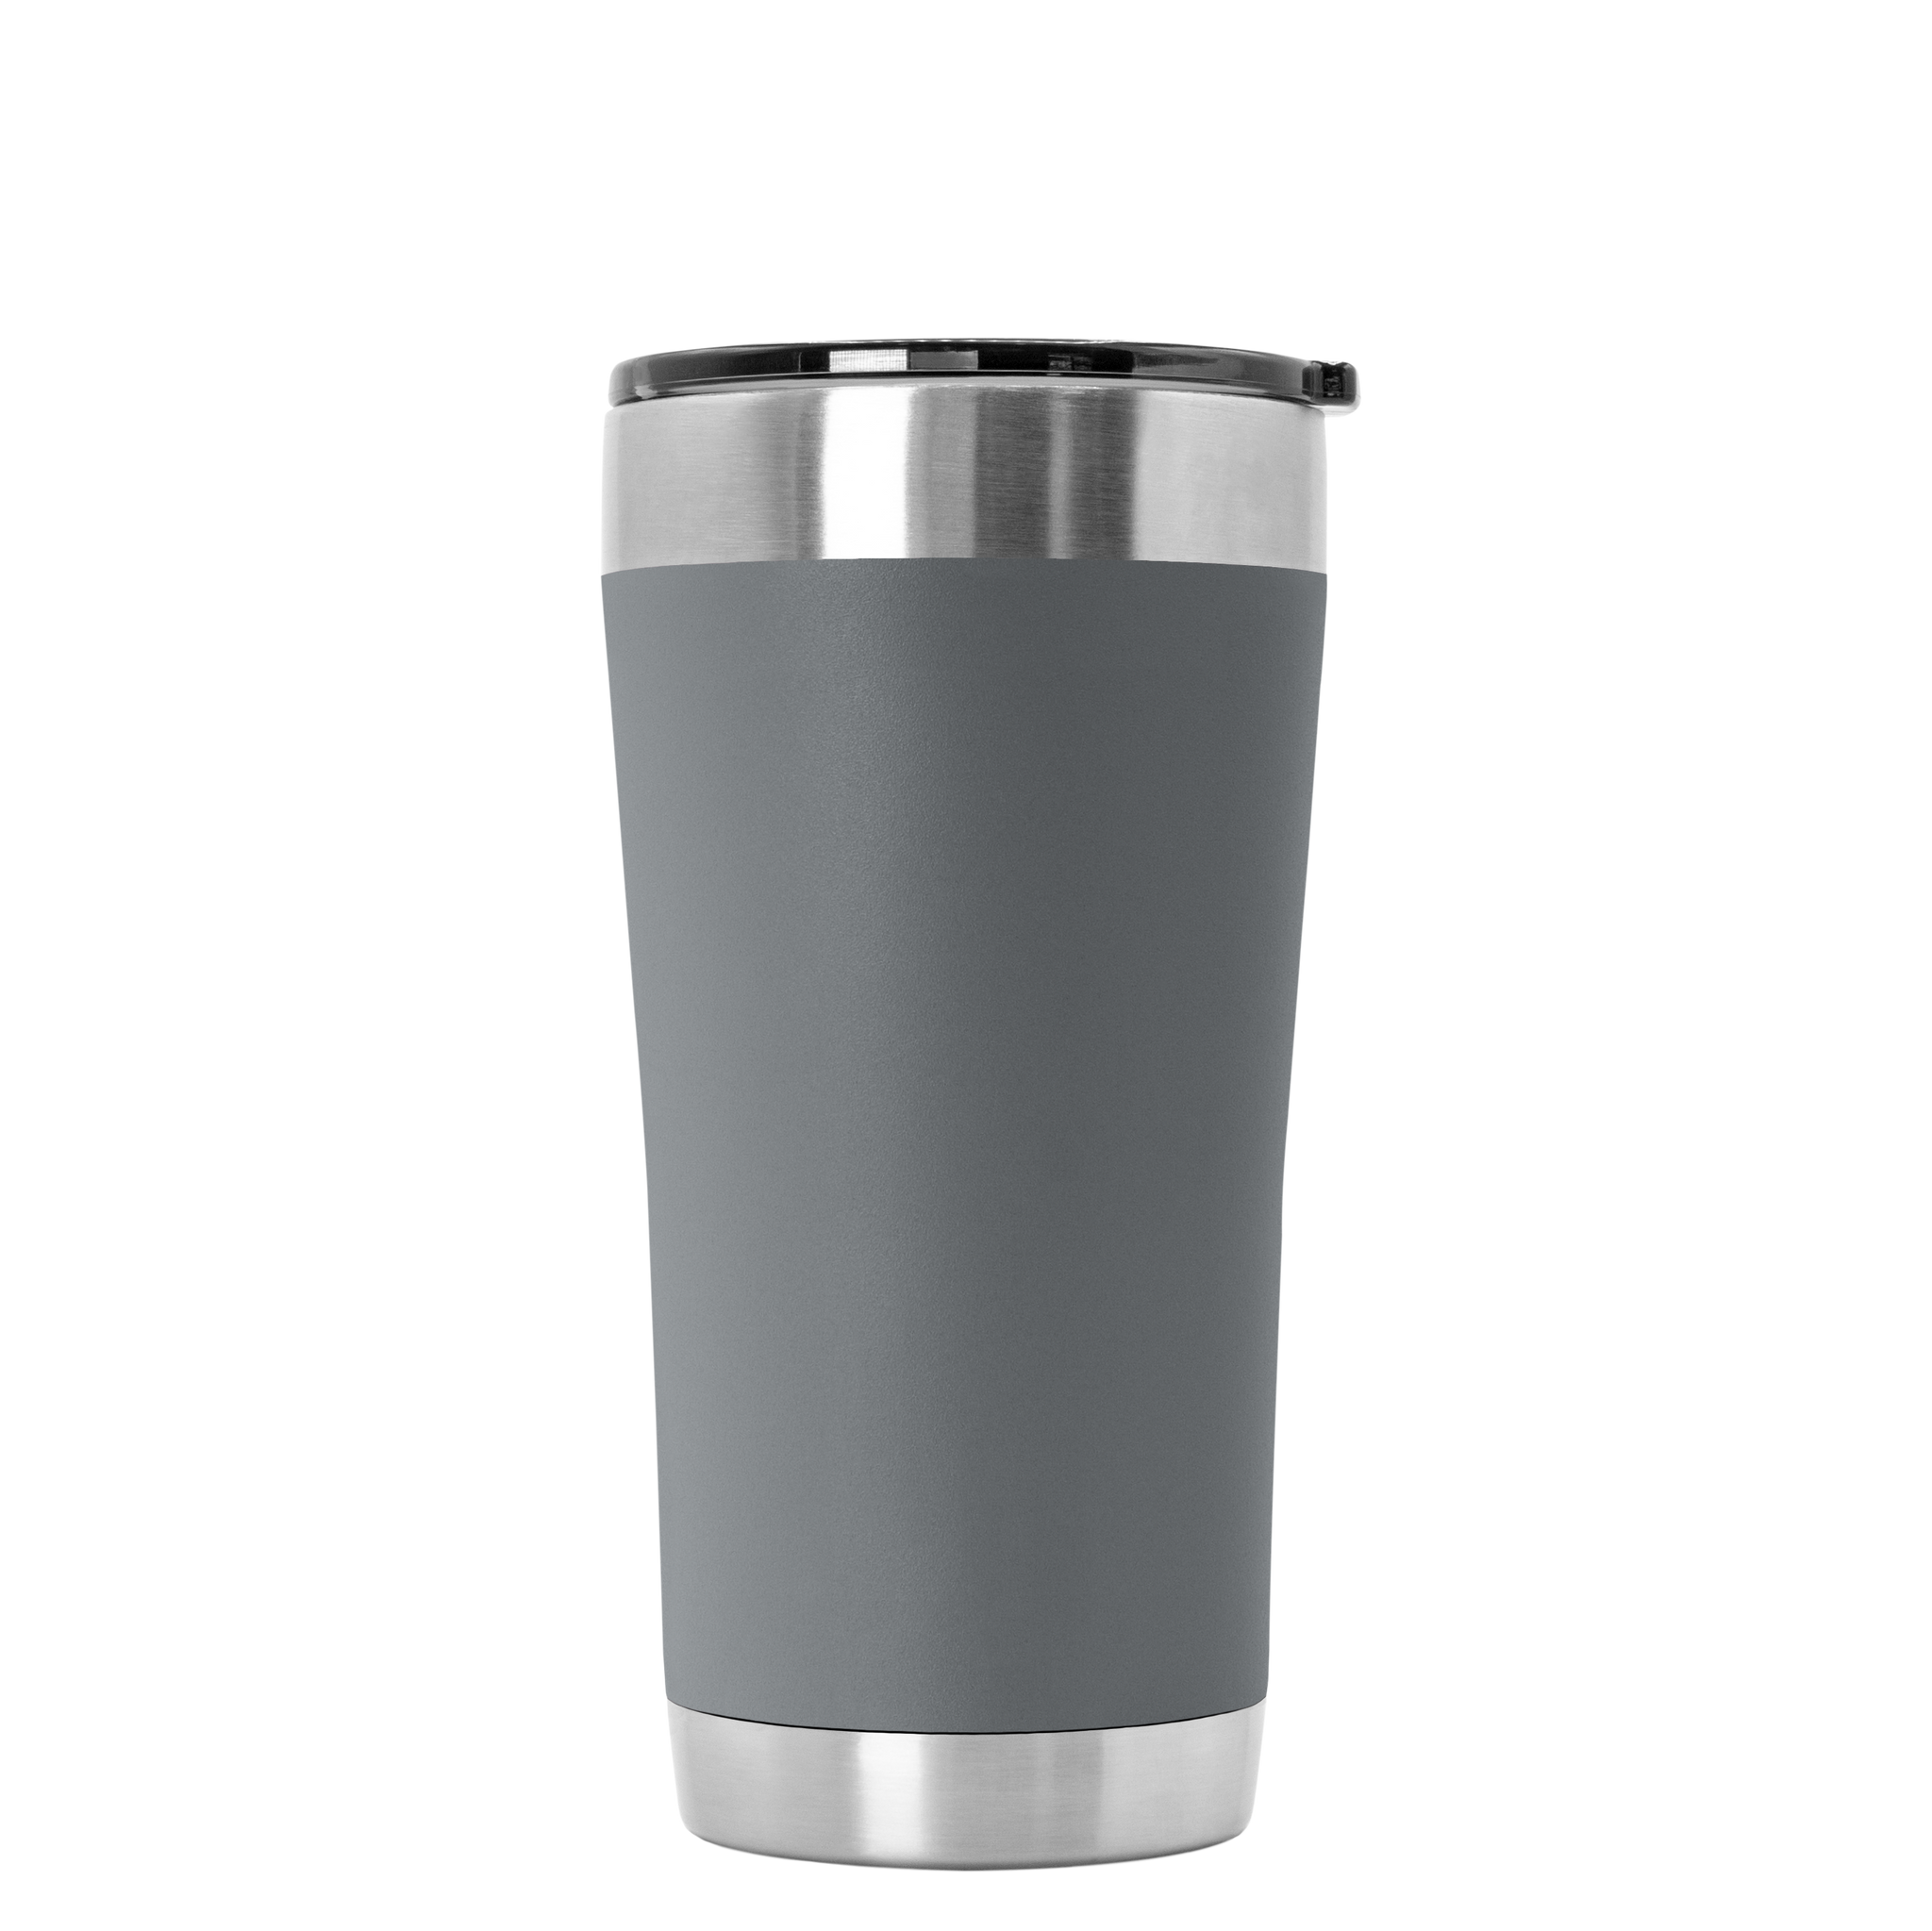 24 oz Stainless Steel Beer Glass with Lid Black